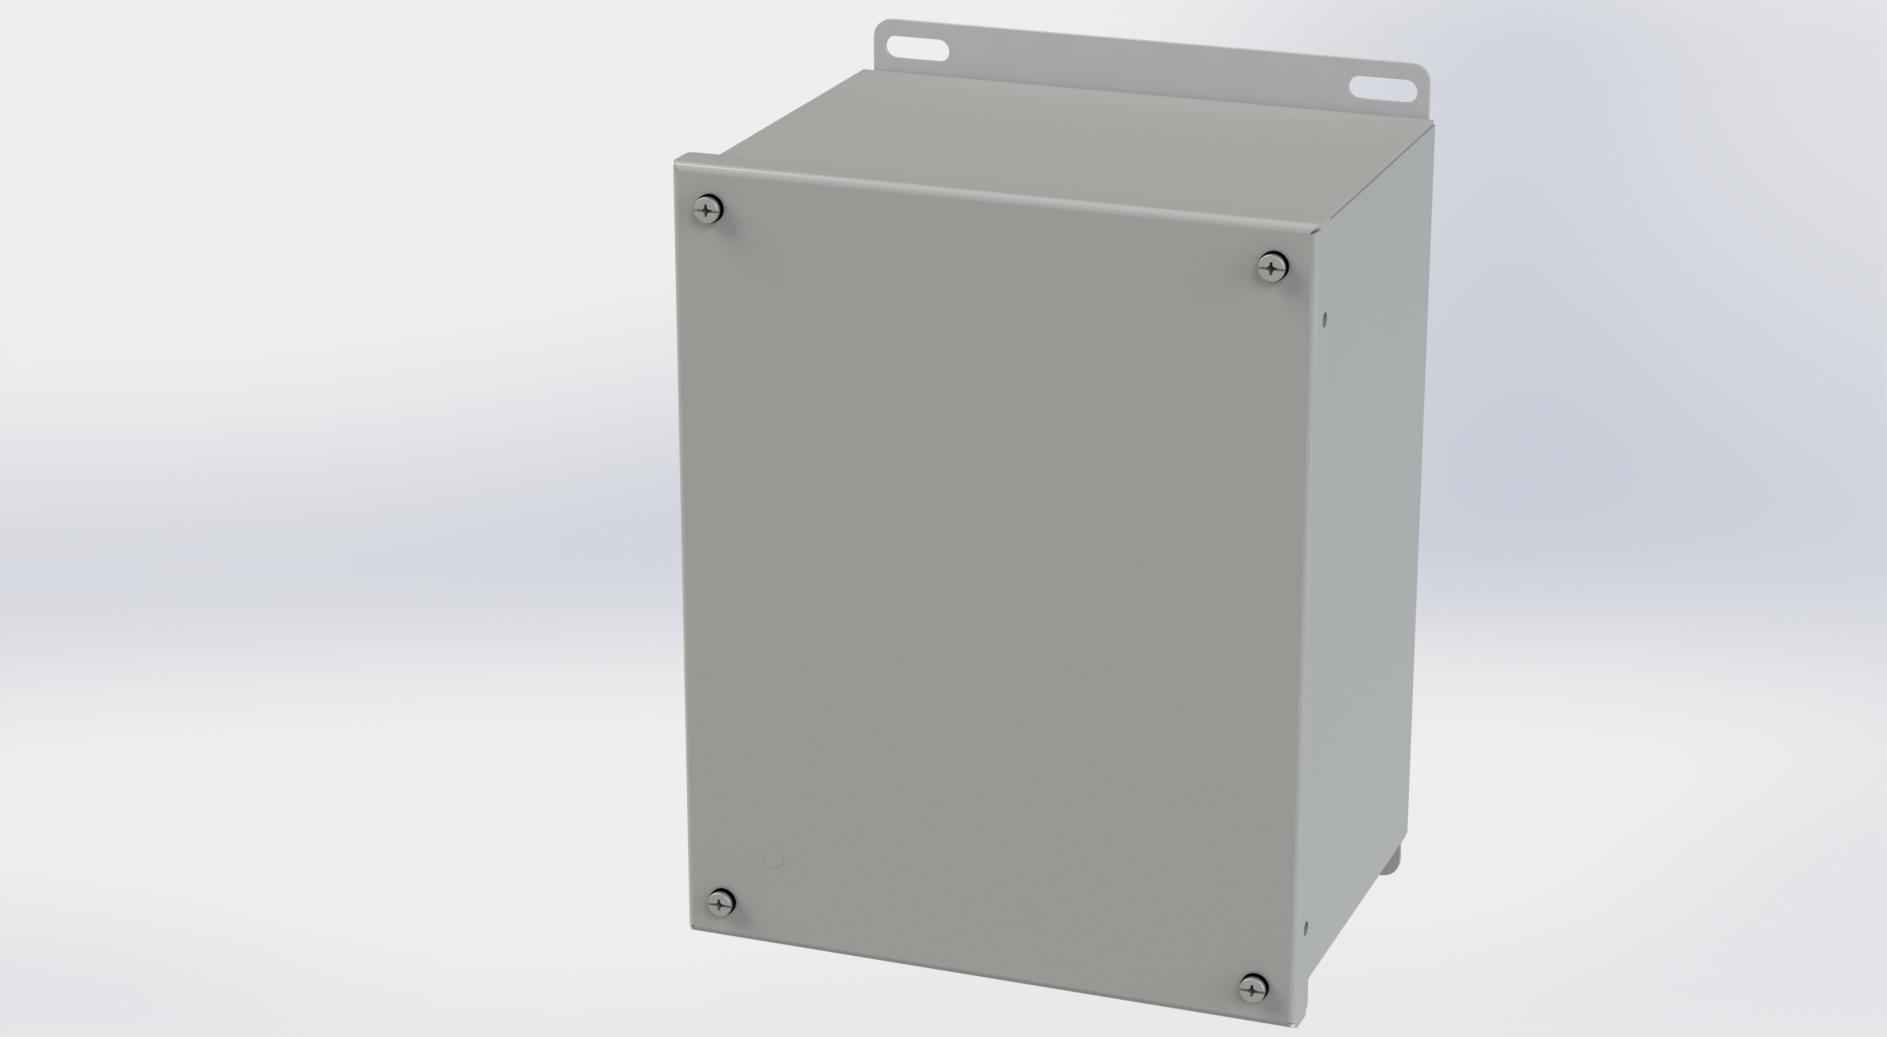 Saginaw Control SCE-10086SC SC Enclosure, Height:10.13", Width:8.00", Depth:6.00", ANSI-61 gray powder coating inside and out.  Optional sub-panels are powder coated white.